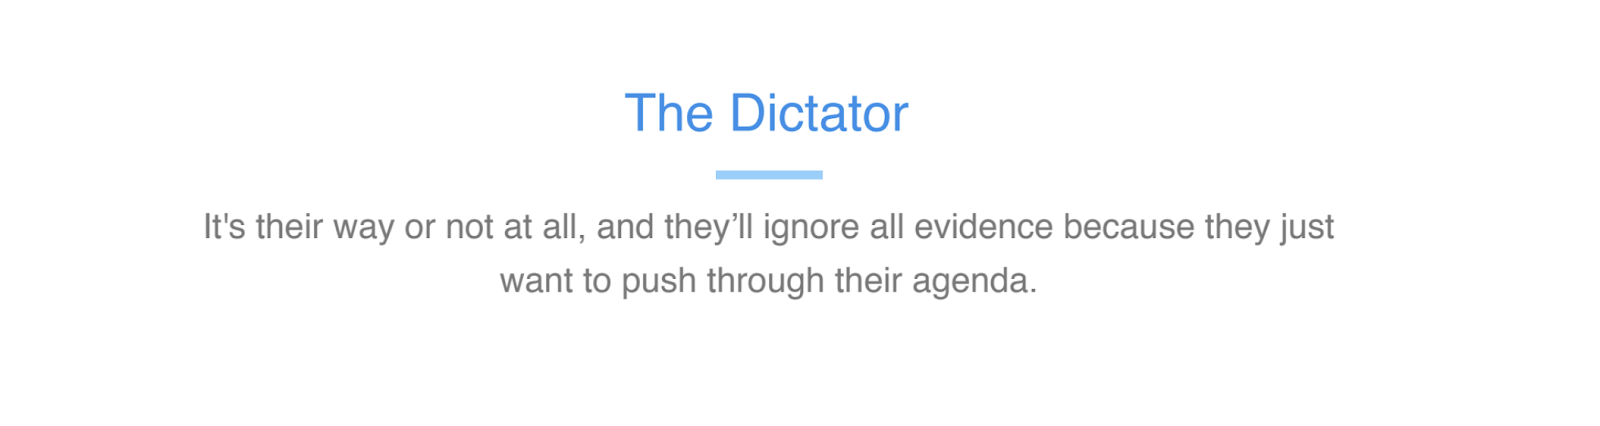 The Dictator definition